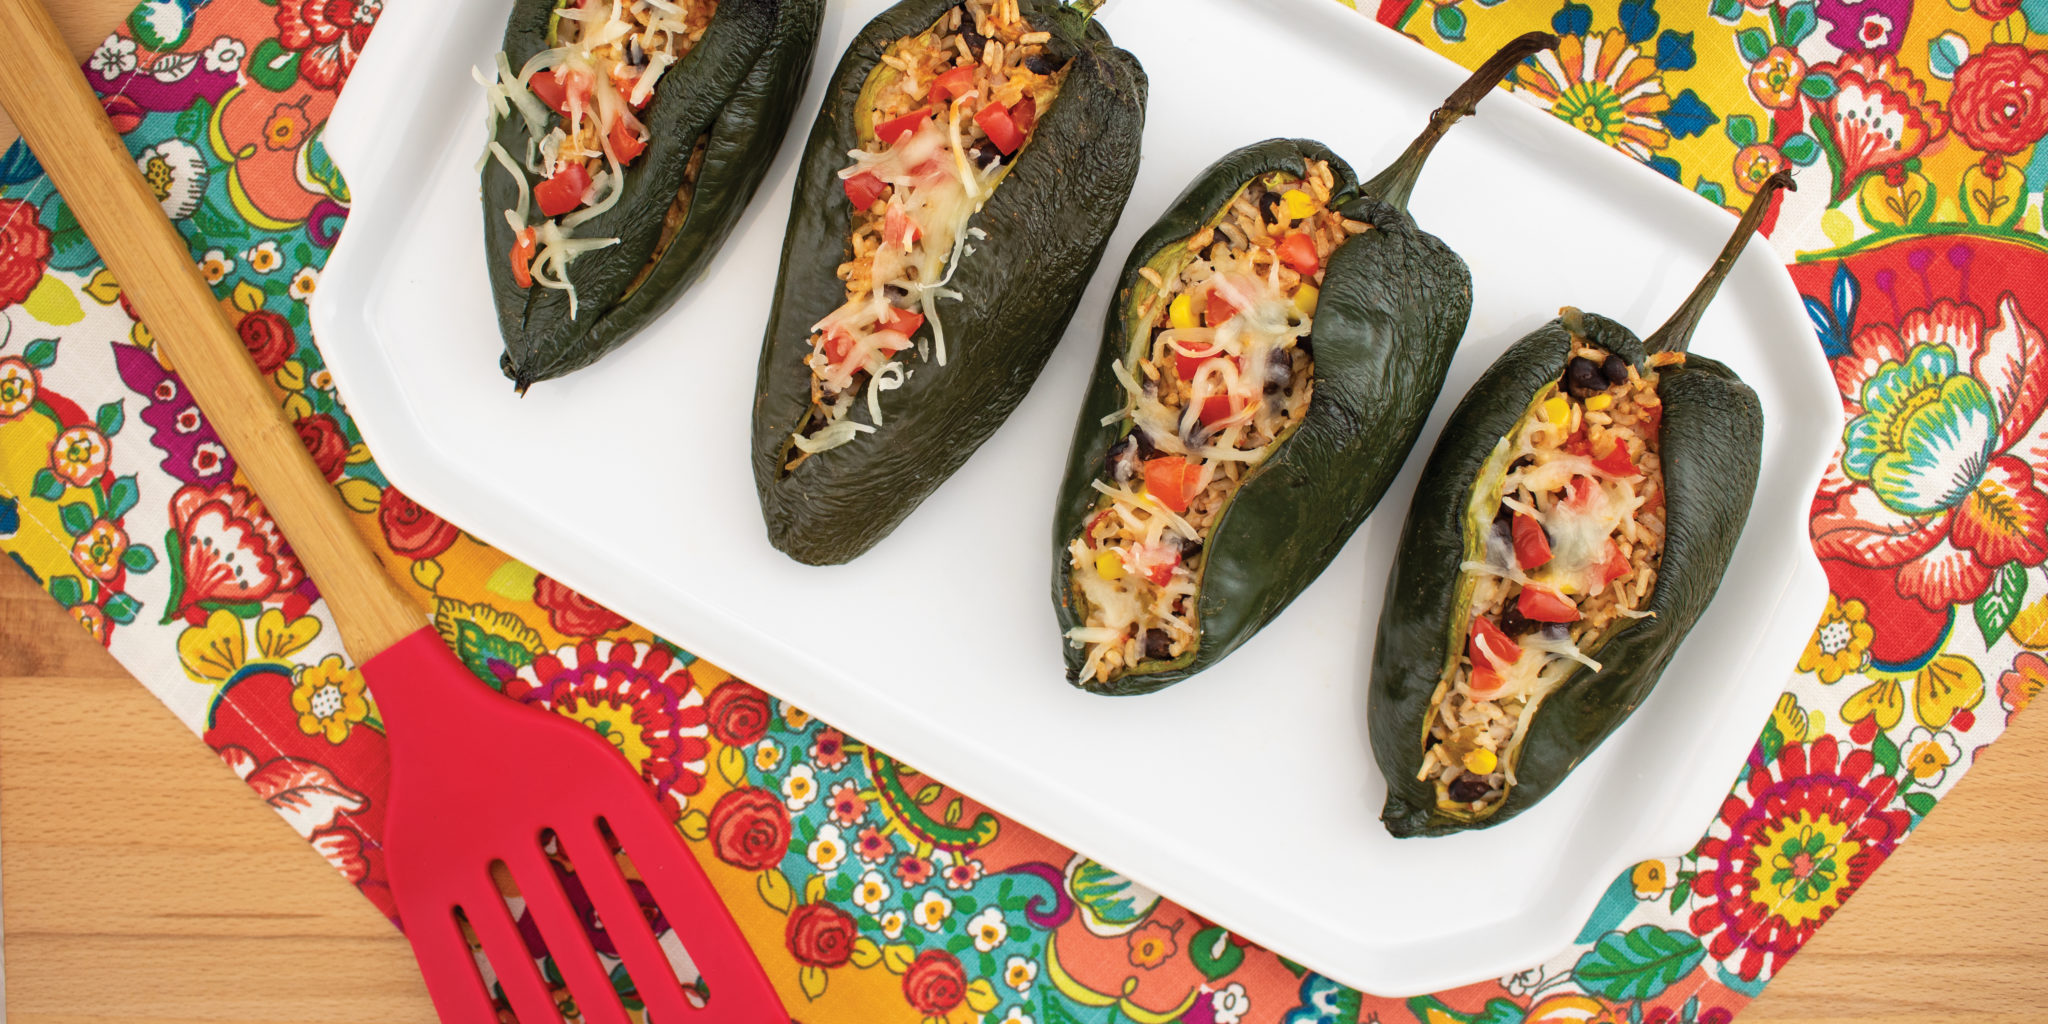 Chiles rellenos horneados - Proyecto ONIE